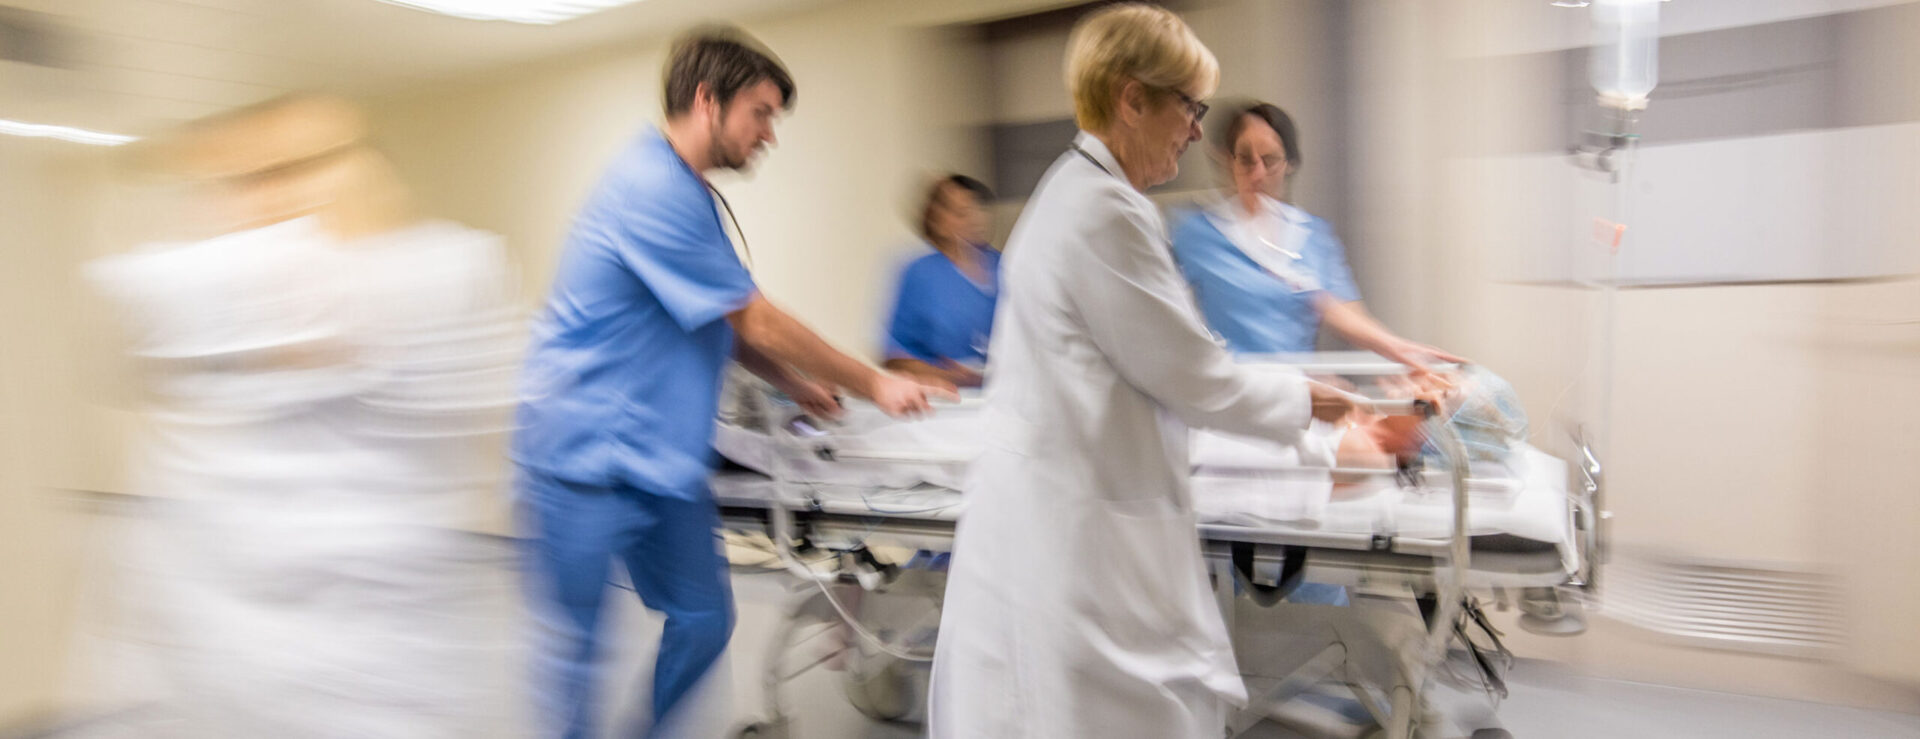 nurses and doctors rushing through hospital hallway with patient bed blurred